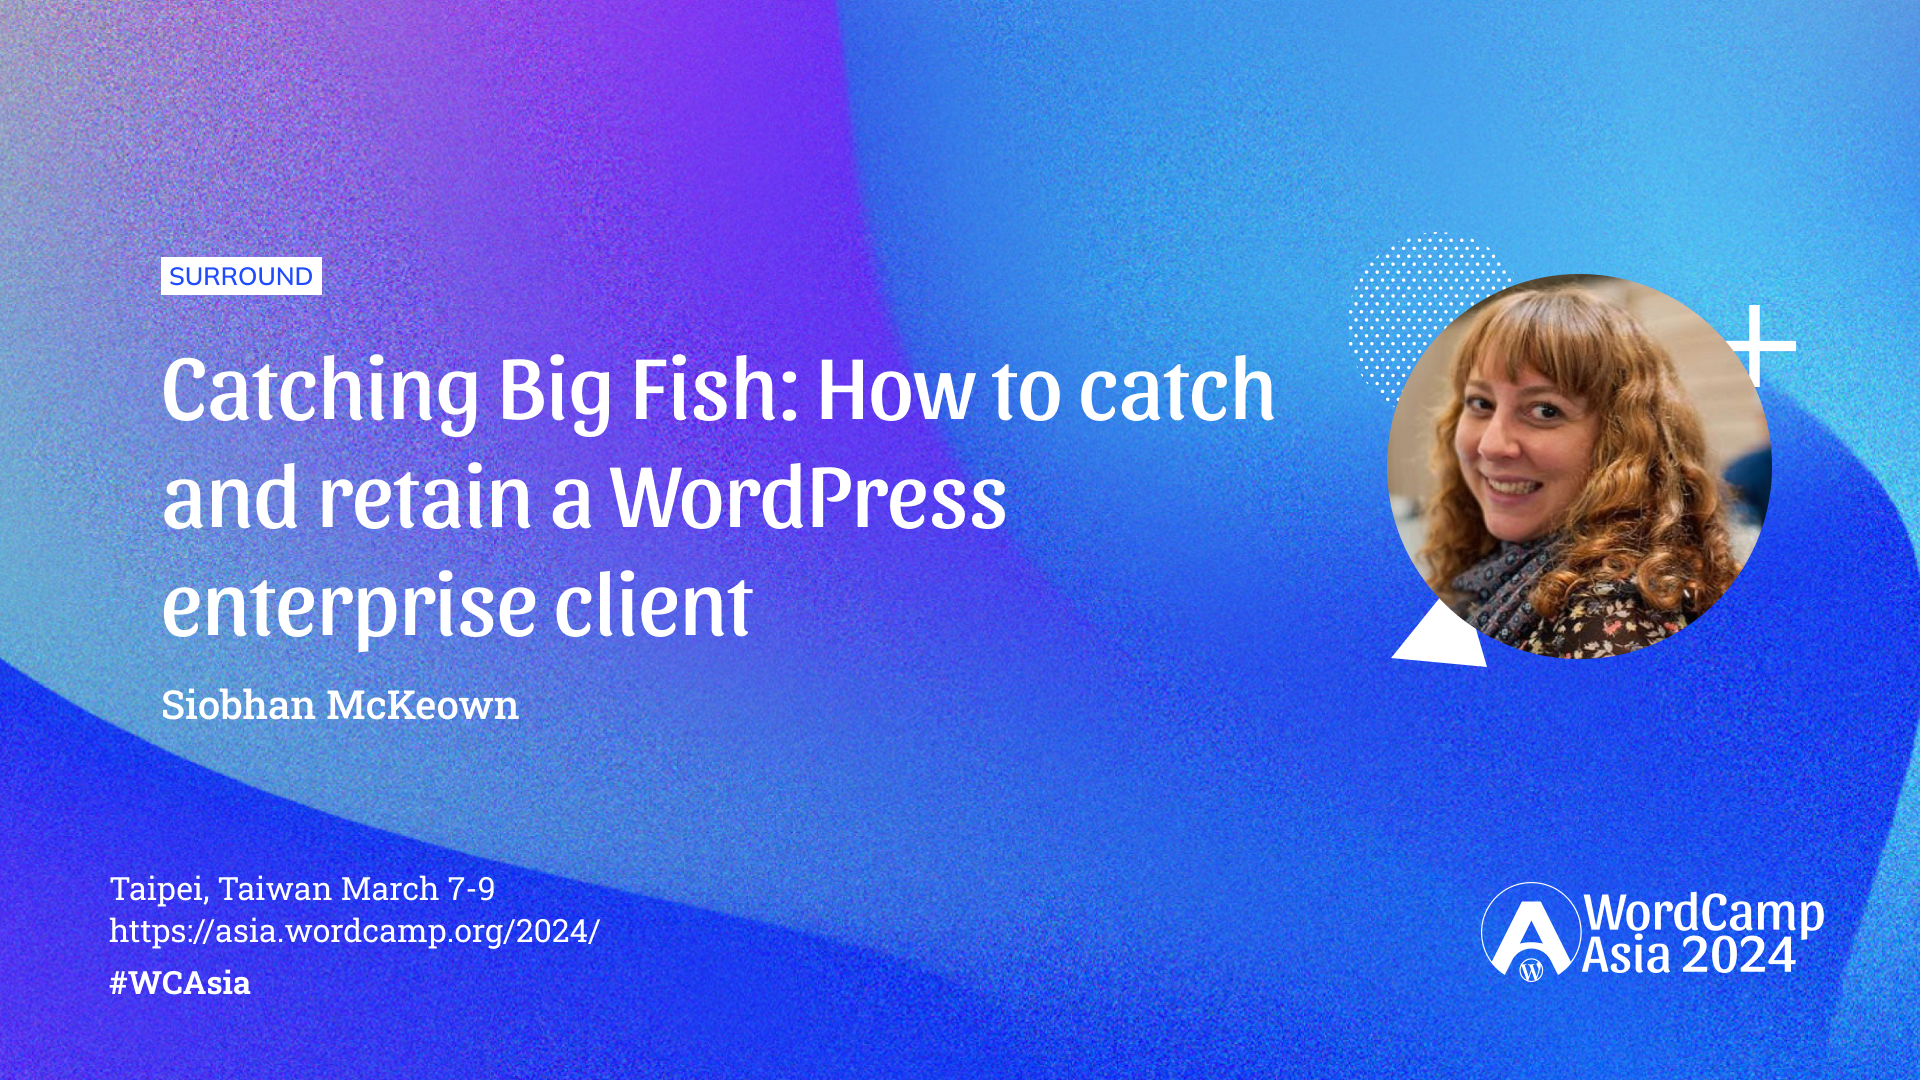 Catching Big Fish: How to catch and retain a WordPress enterprise client